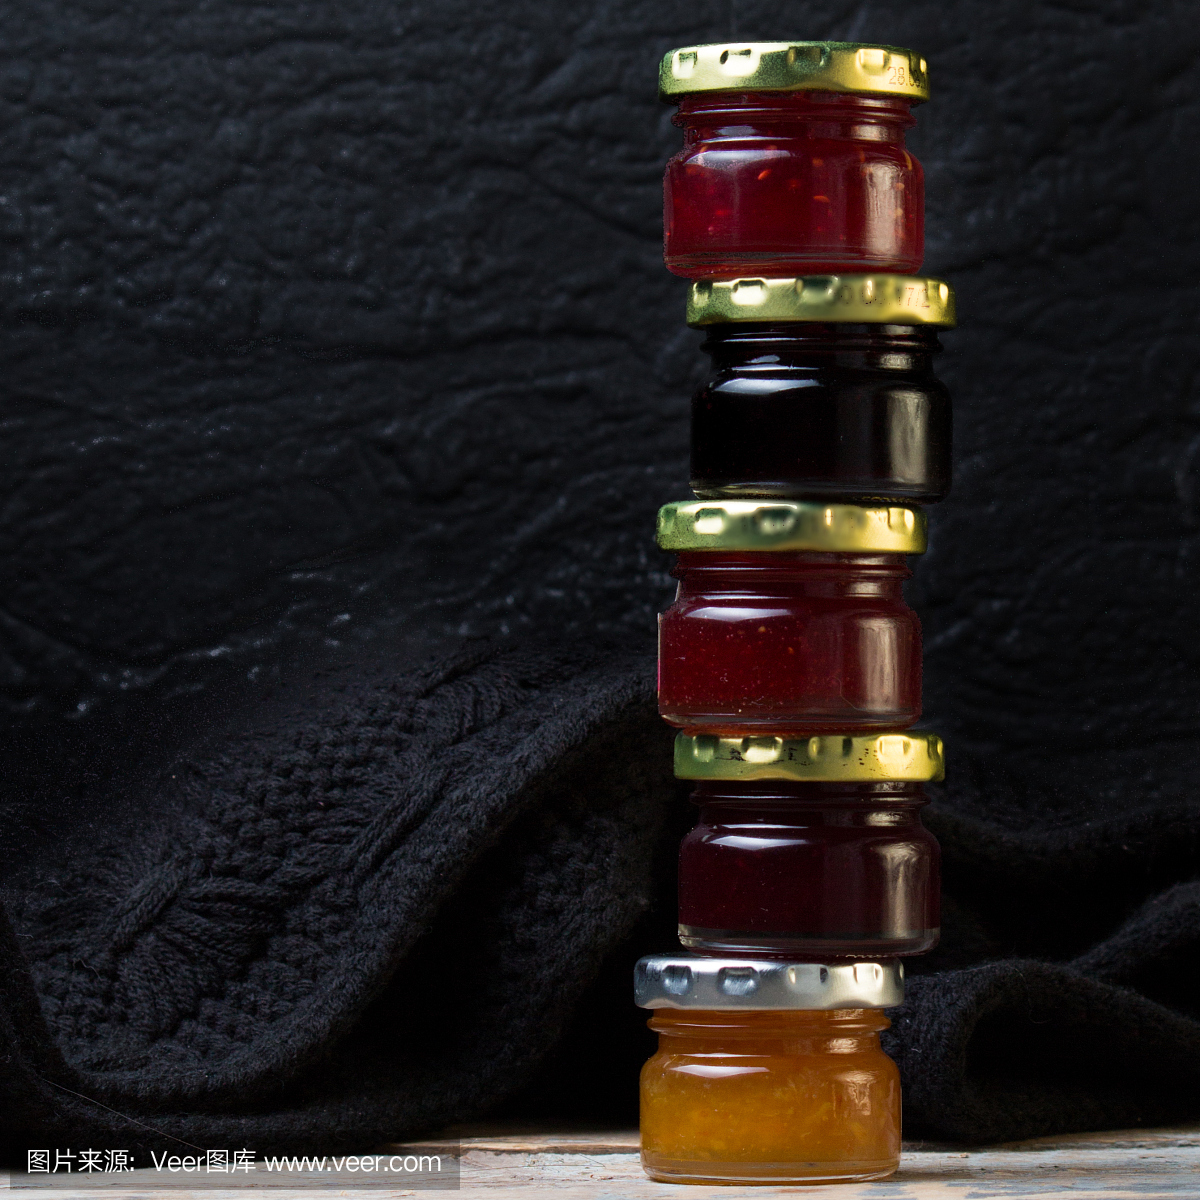 jam in small jars with different flavors